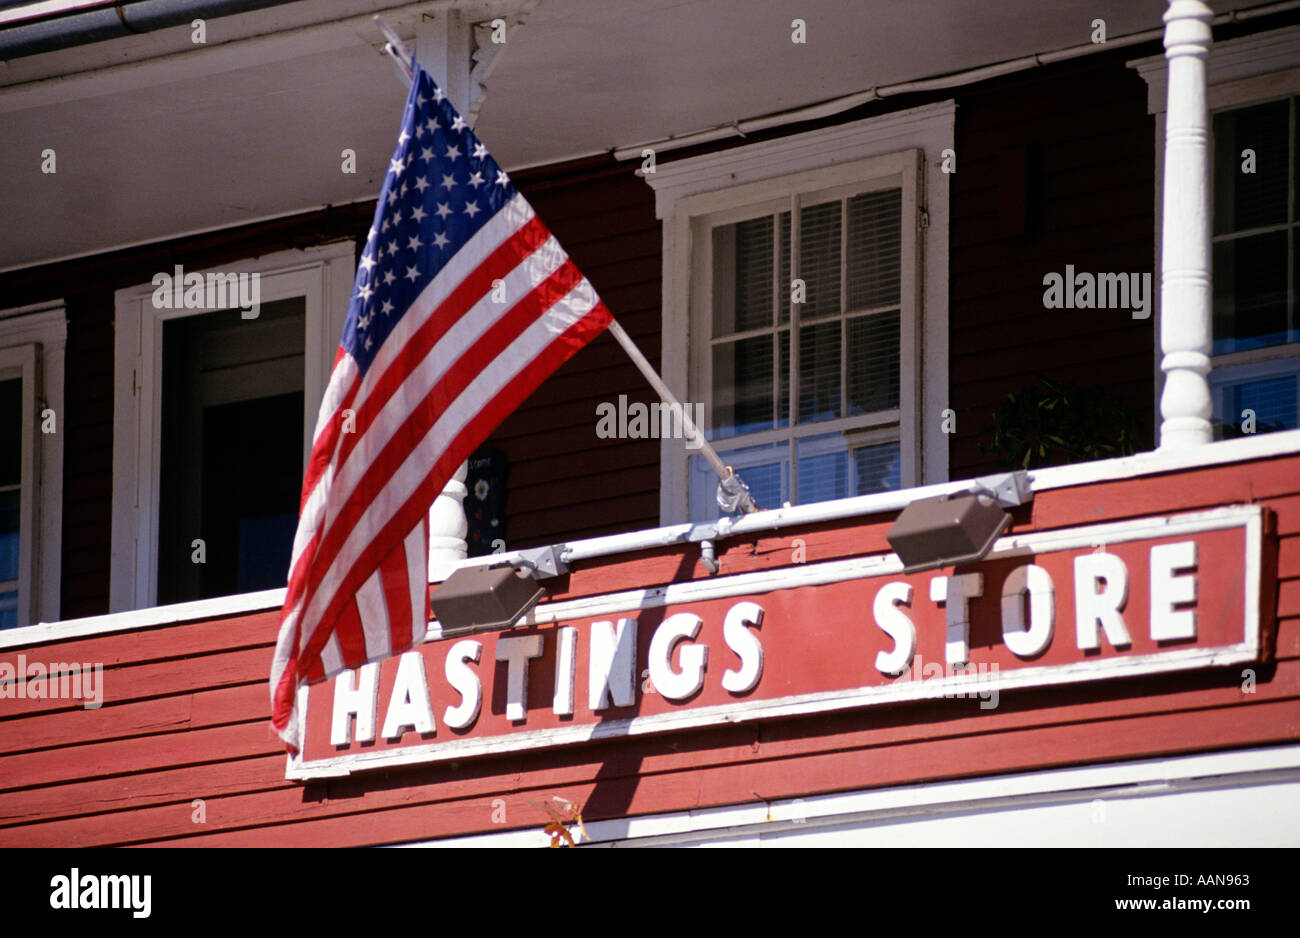 Hastings Store West Danville Vermont USA Stock Photo